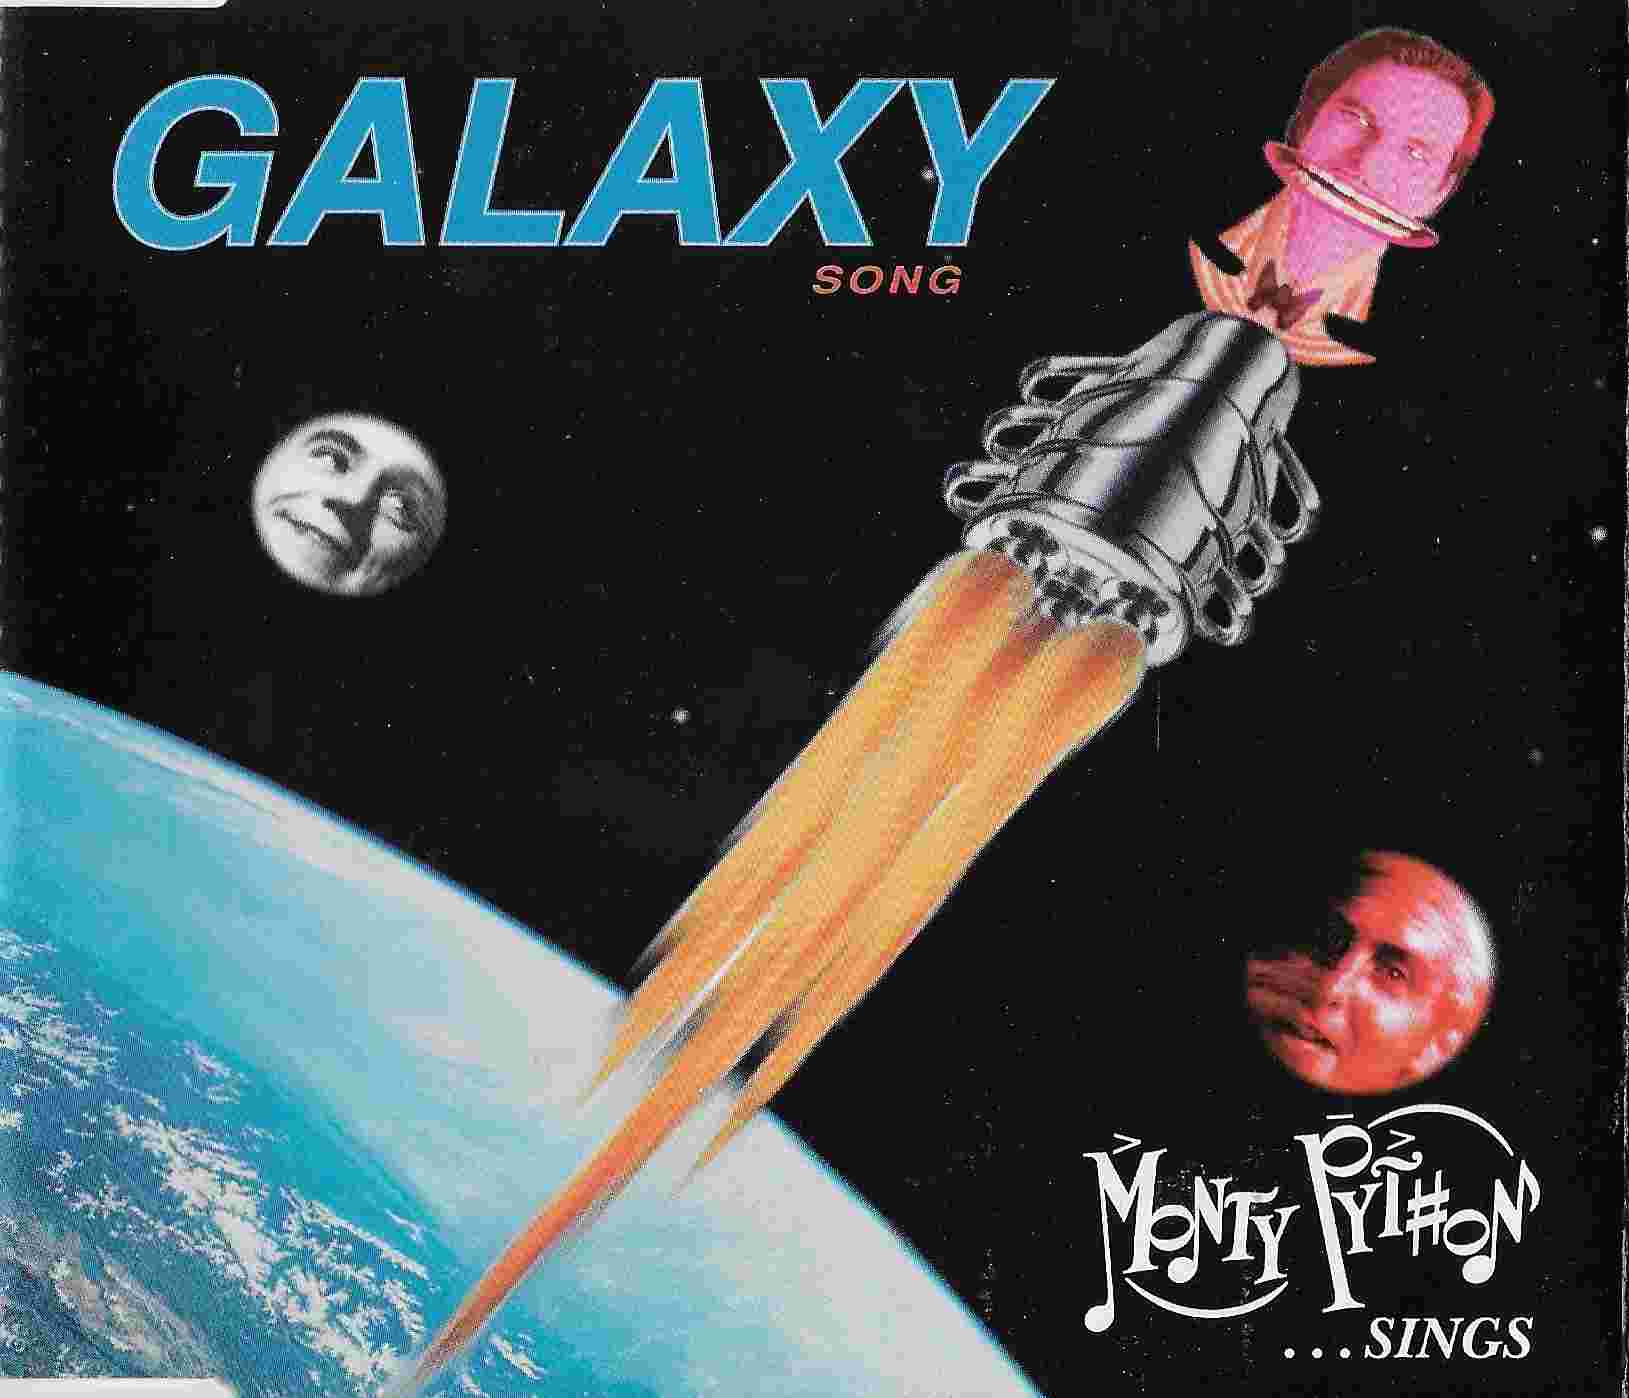 Picture of Galaxy song (Monty Python's flying circus) by artist Monty Python from the BBC cdsingles - Records and Tapes library